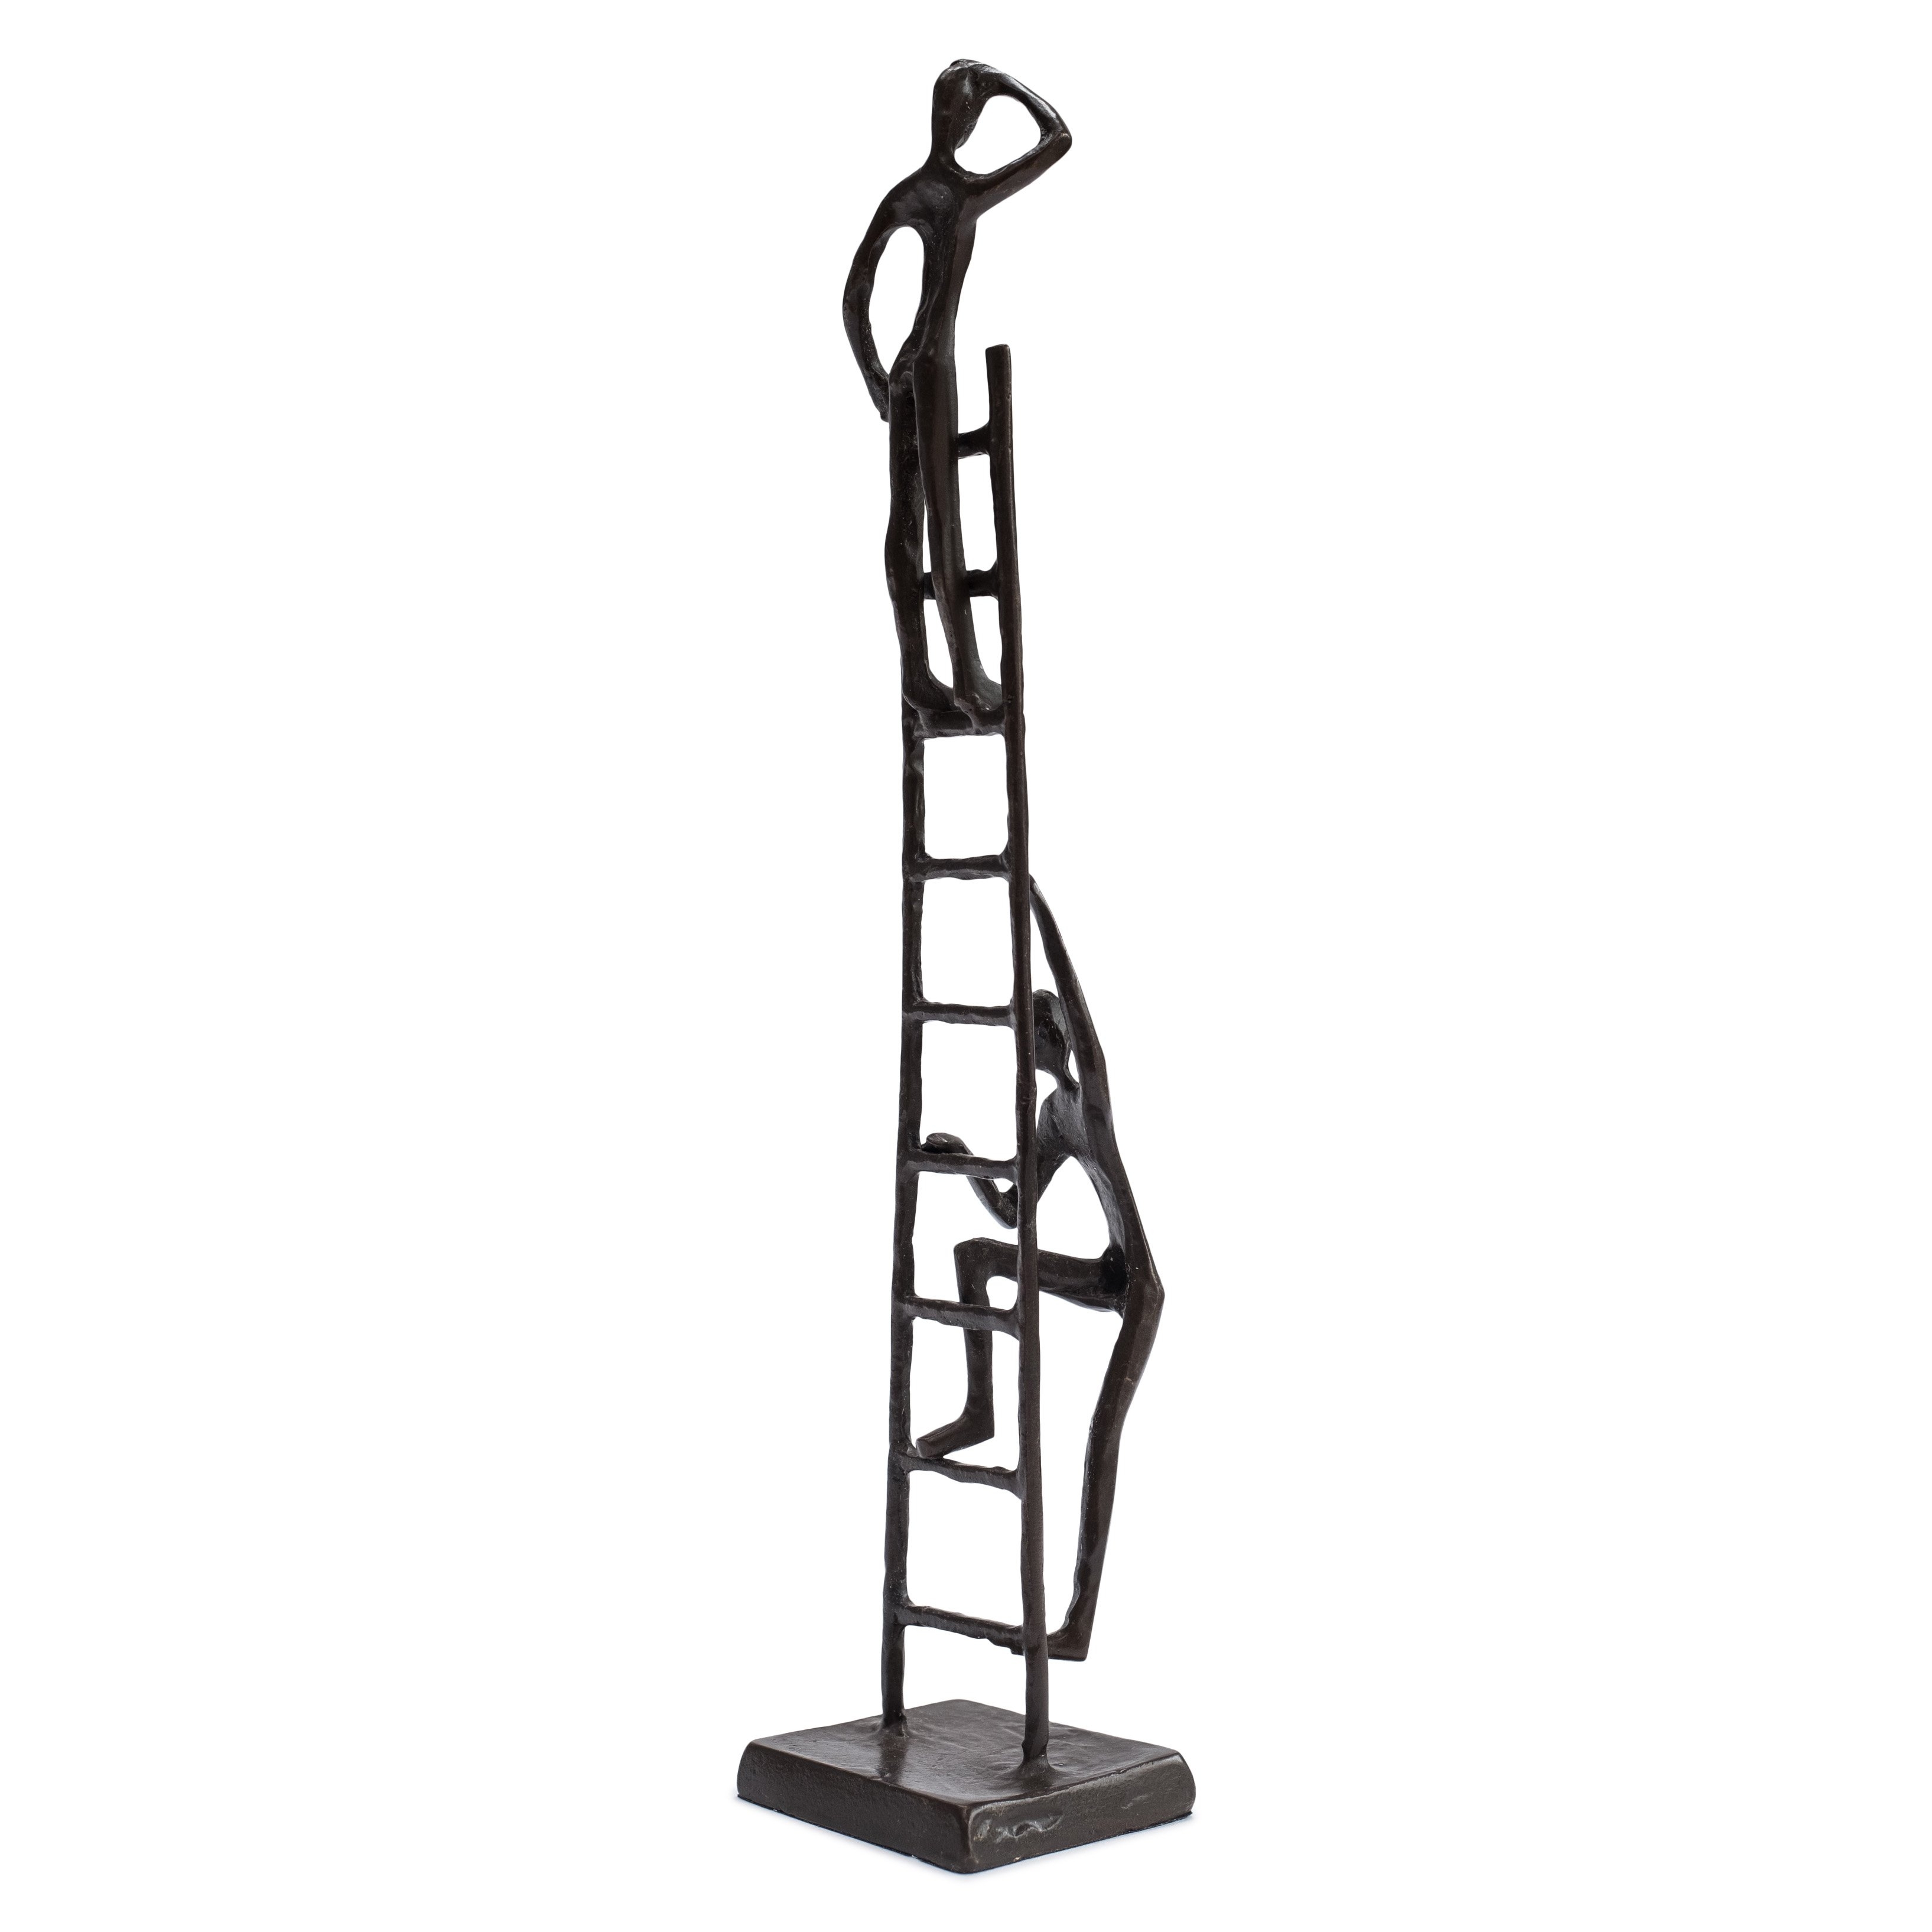 Solid Bronze Sculpture – “The Corporate Ladder”